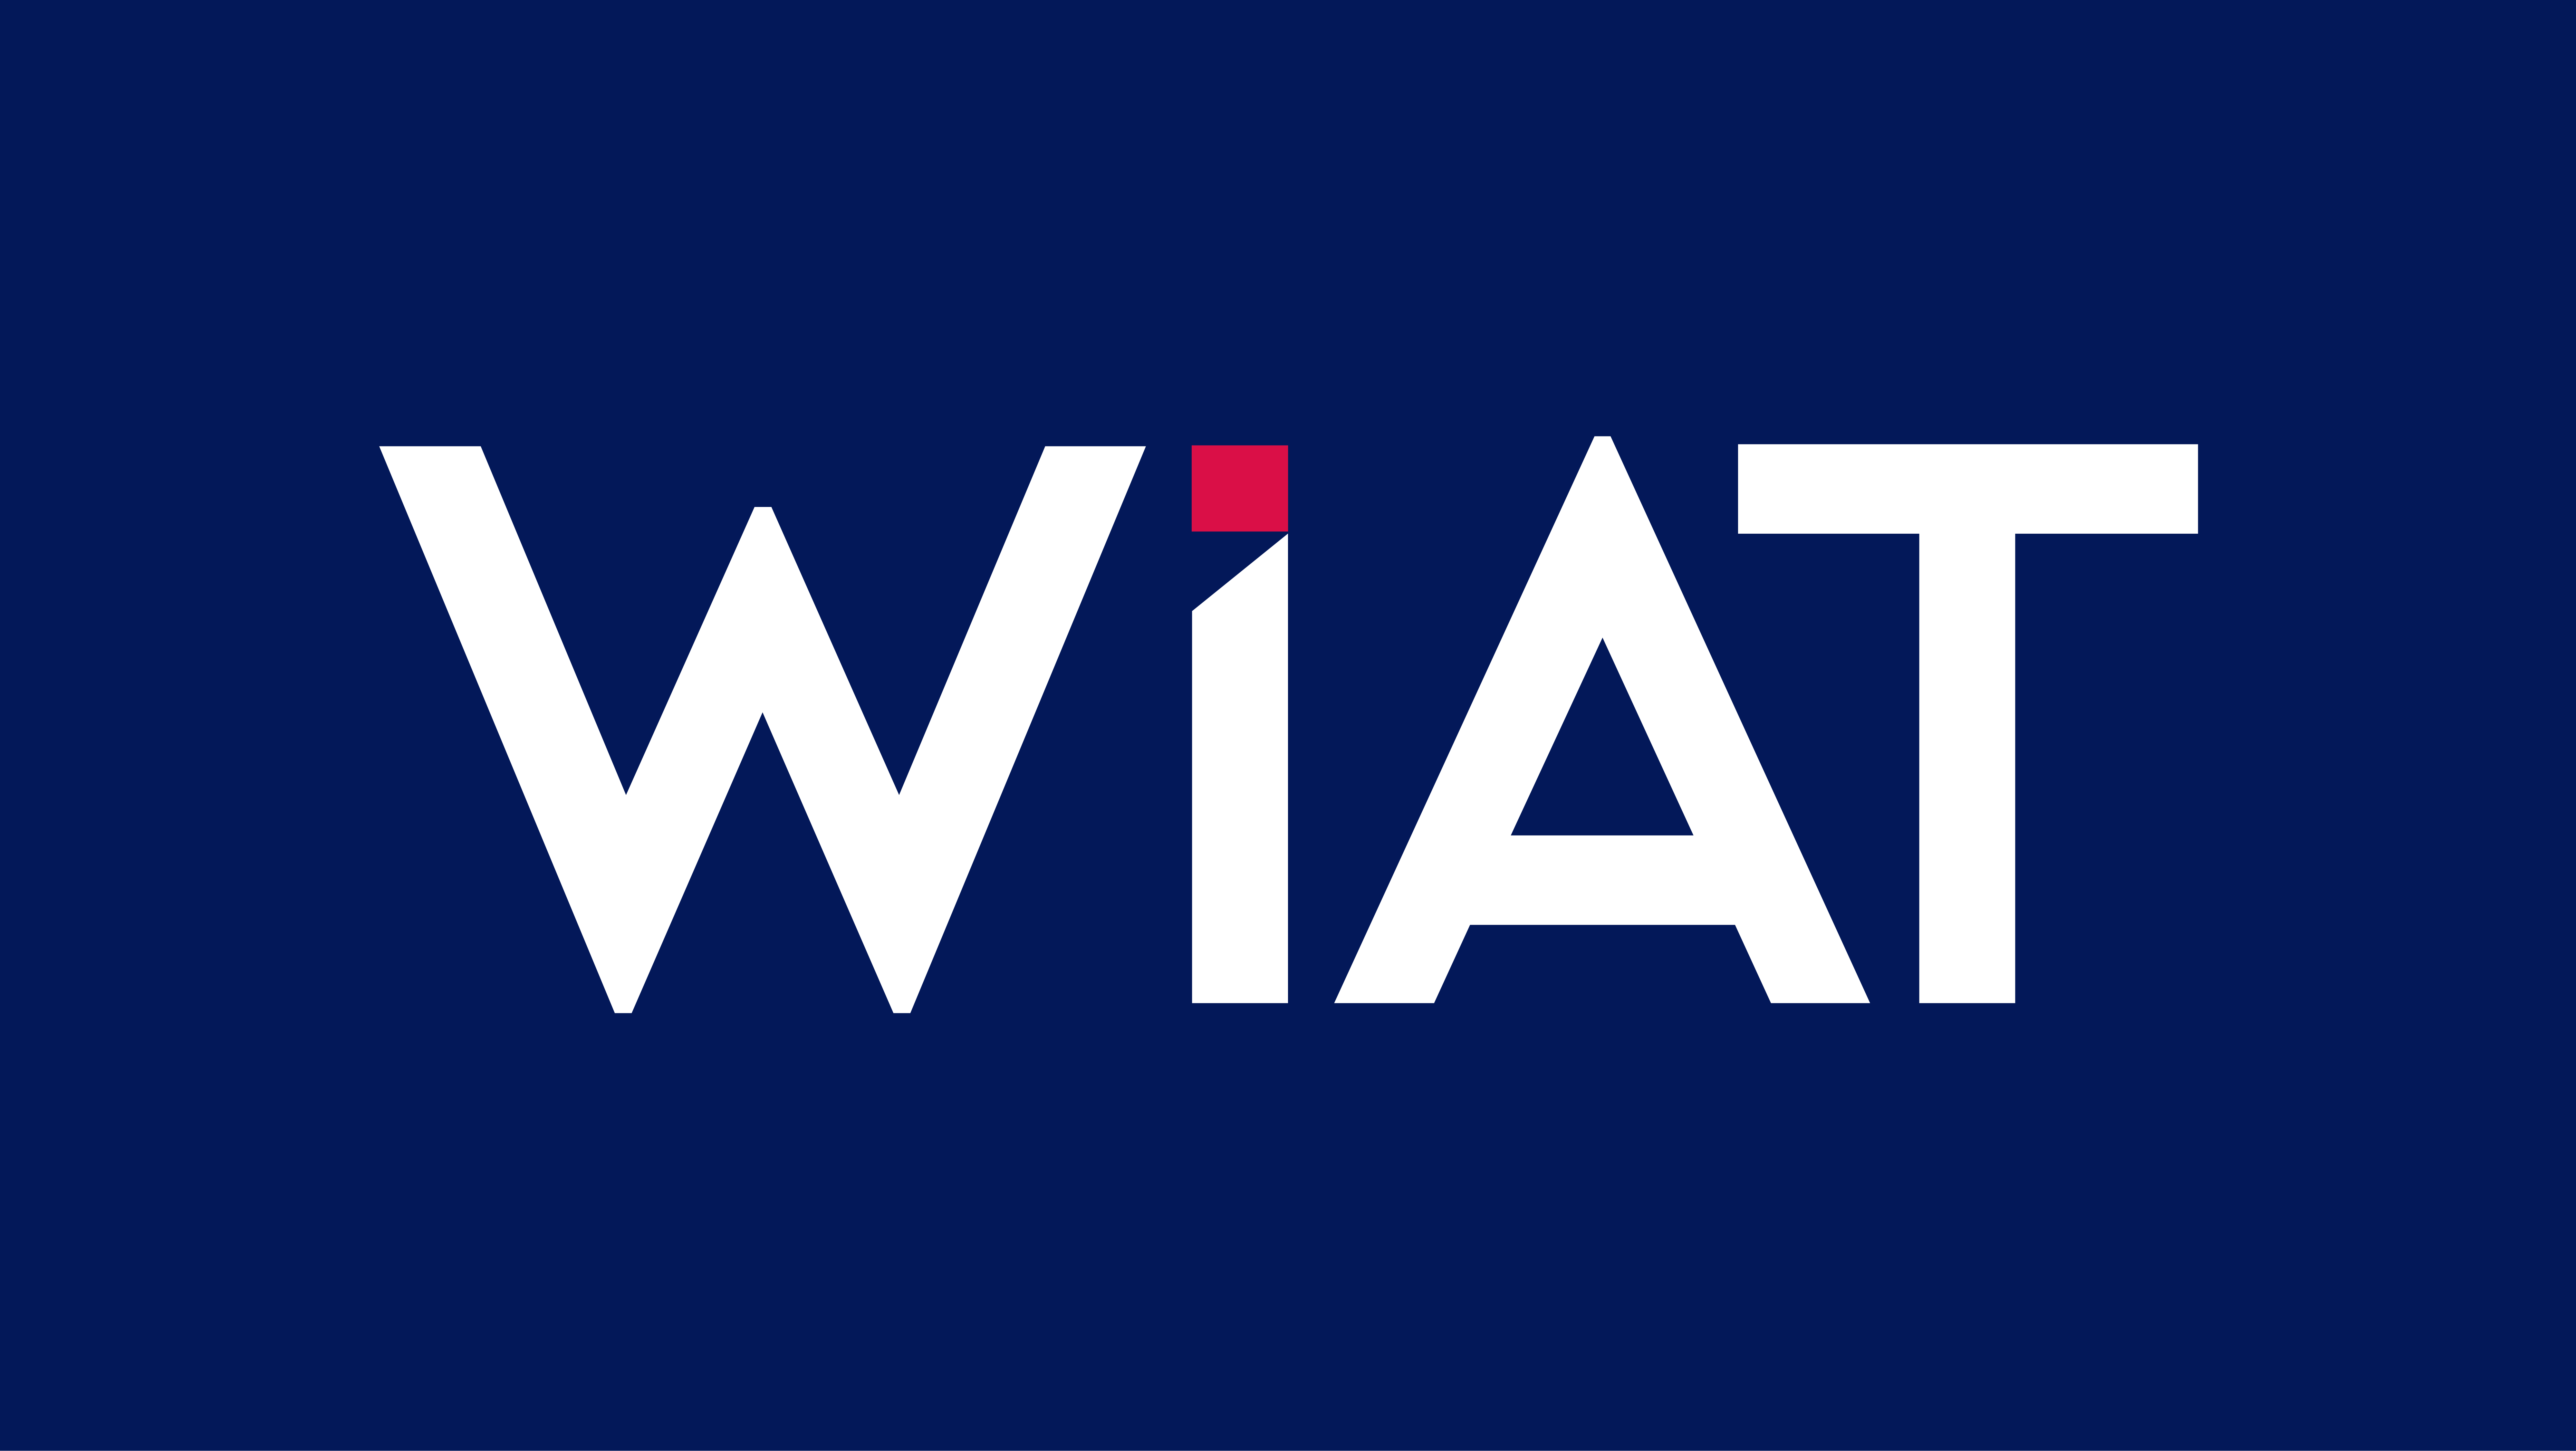 WiAT logo - white - pink dot - navy background.png